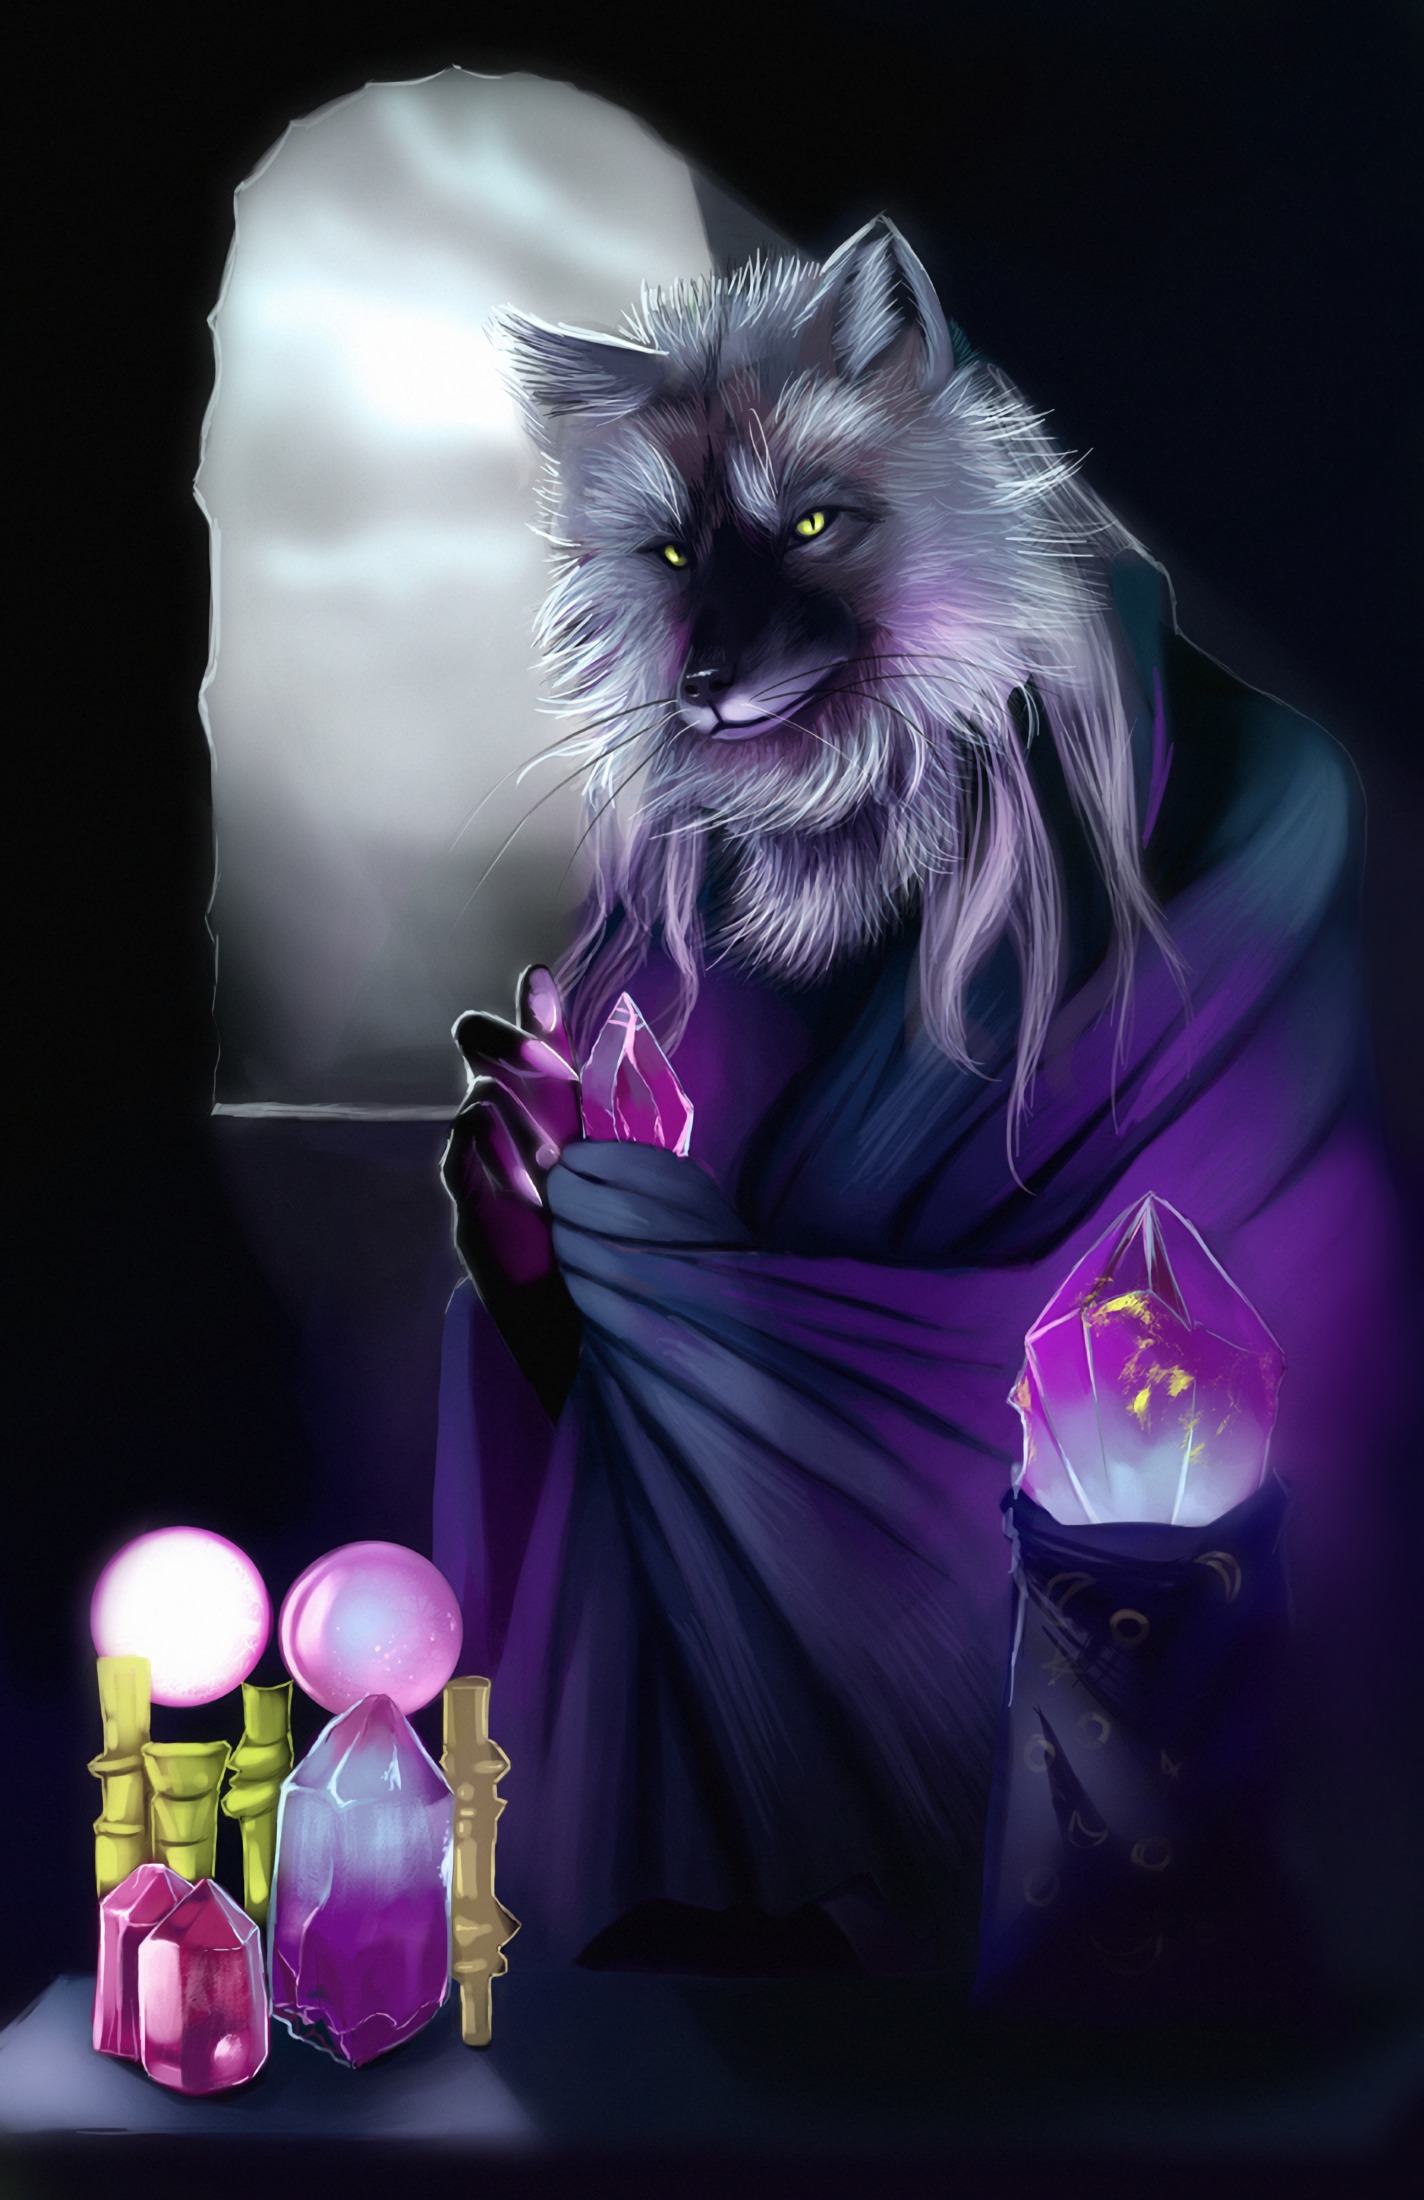 65695 download wallpaper magic, art, wolf, crystals, alchemist screensavers and pictures for free